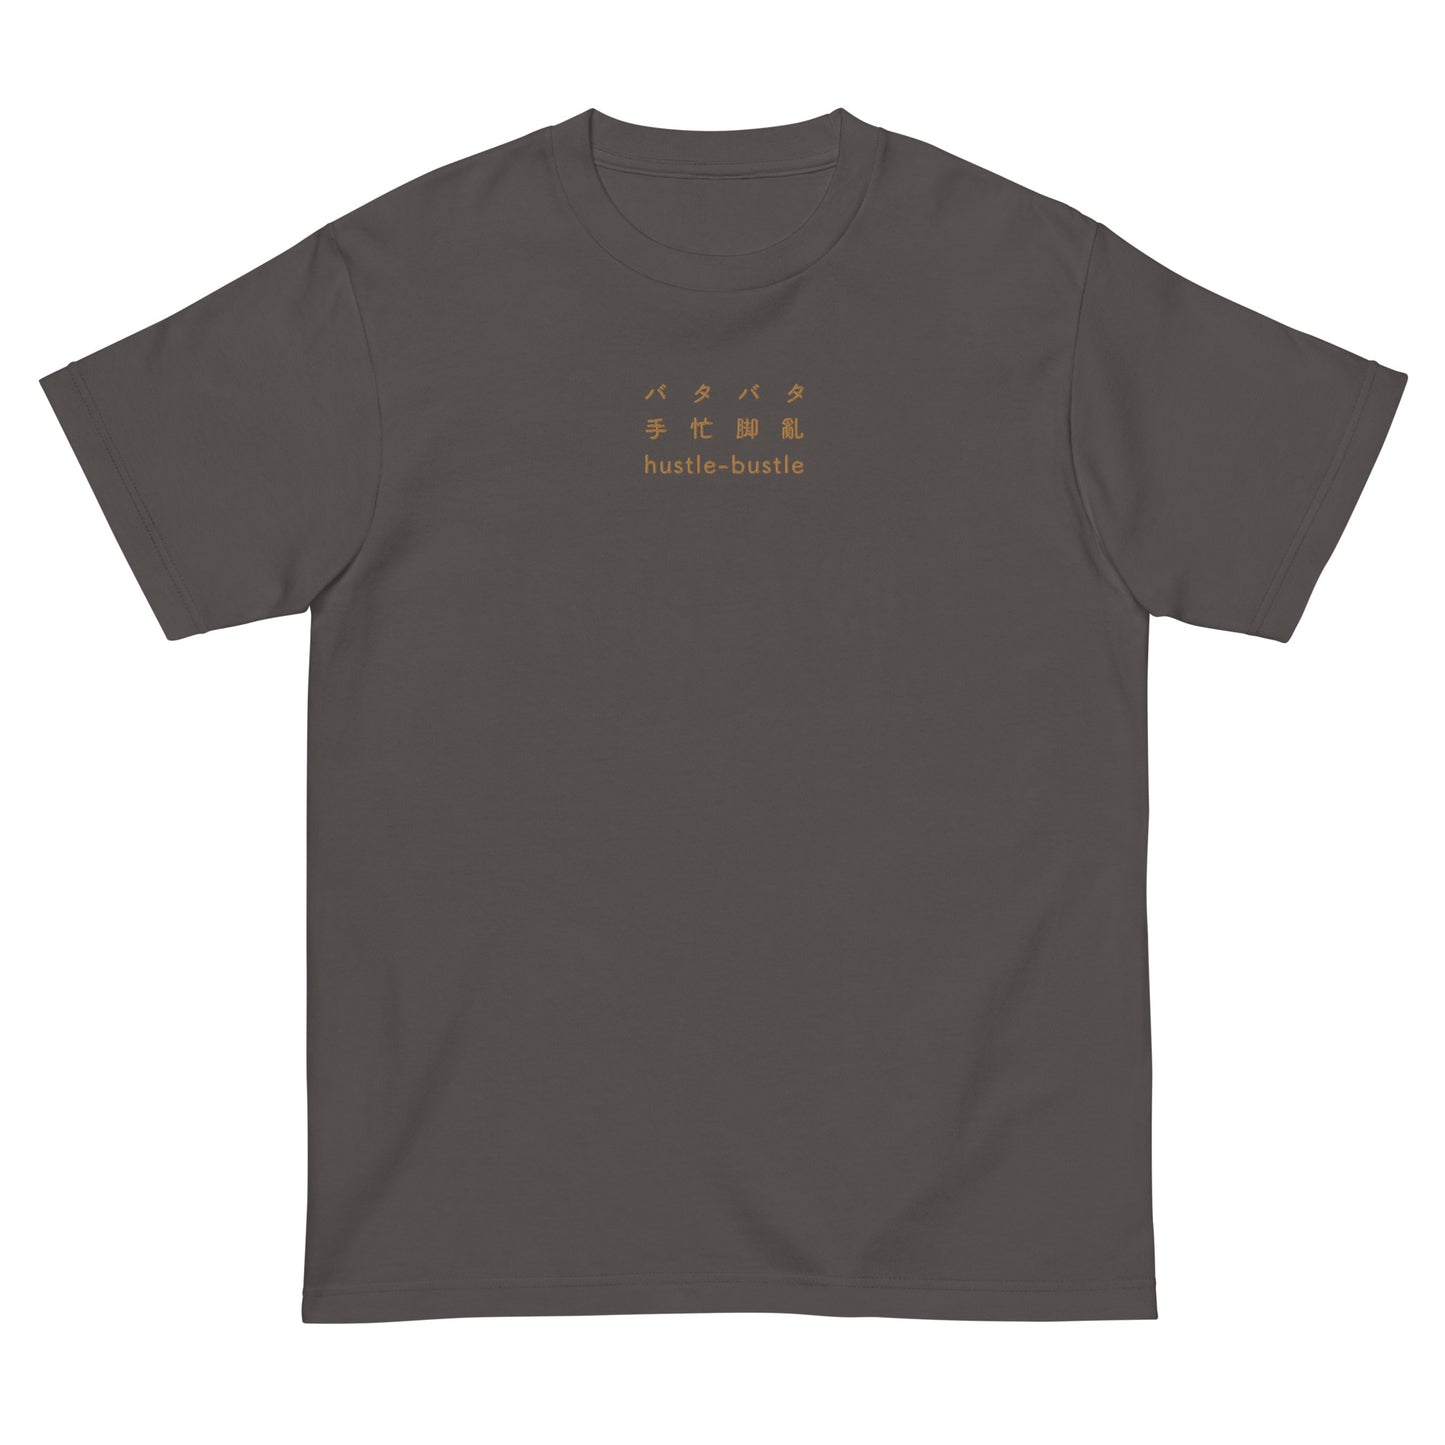 Charcoal Gray High Quality Tee - Front Design with an Brown Embroidery "Hustle-Bustle" in Japanese, Chinese and English